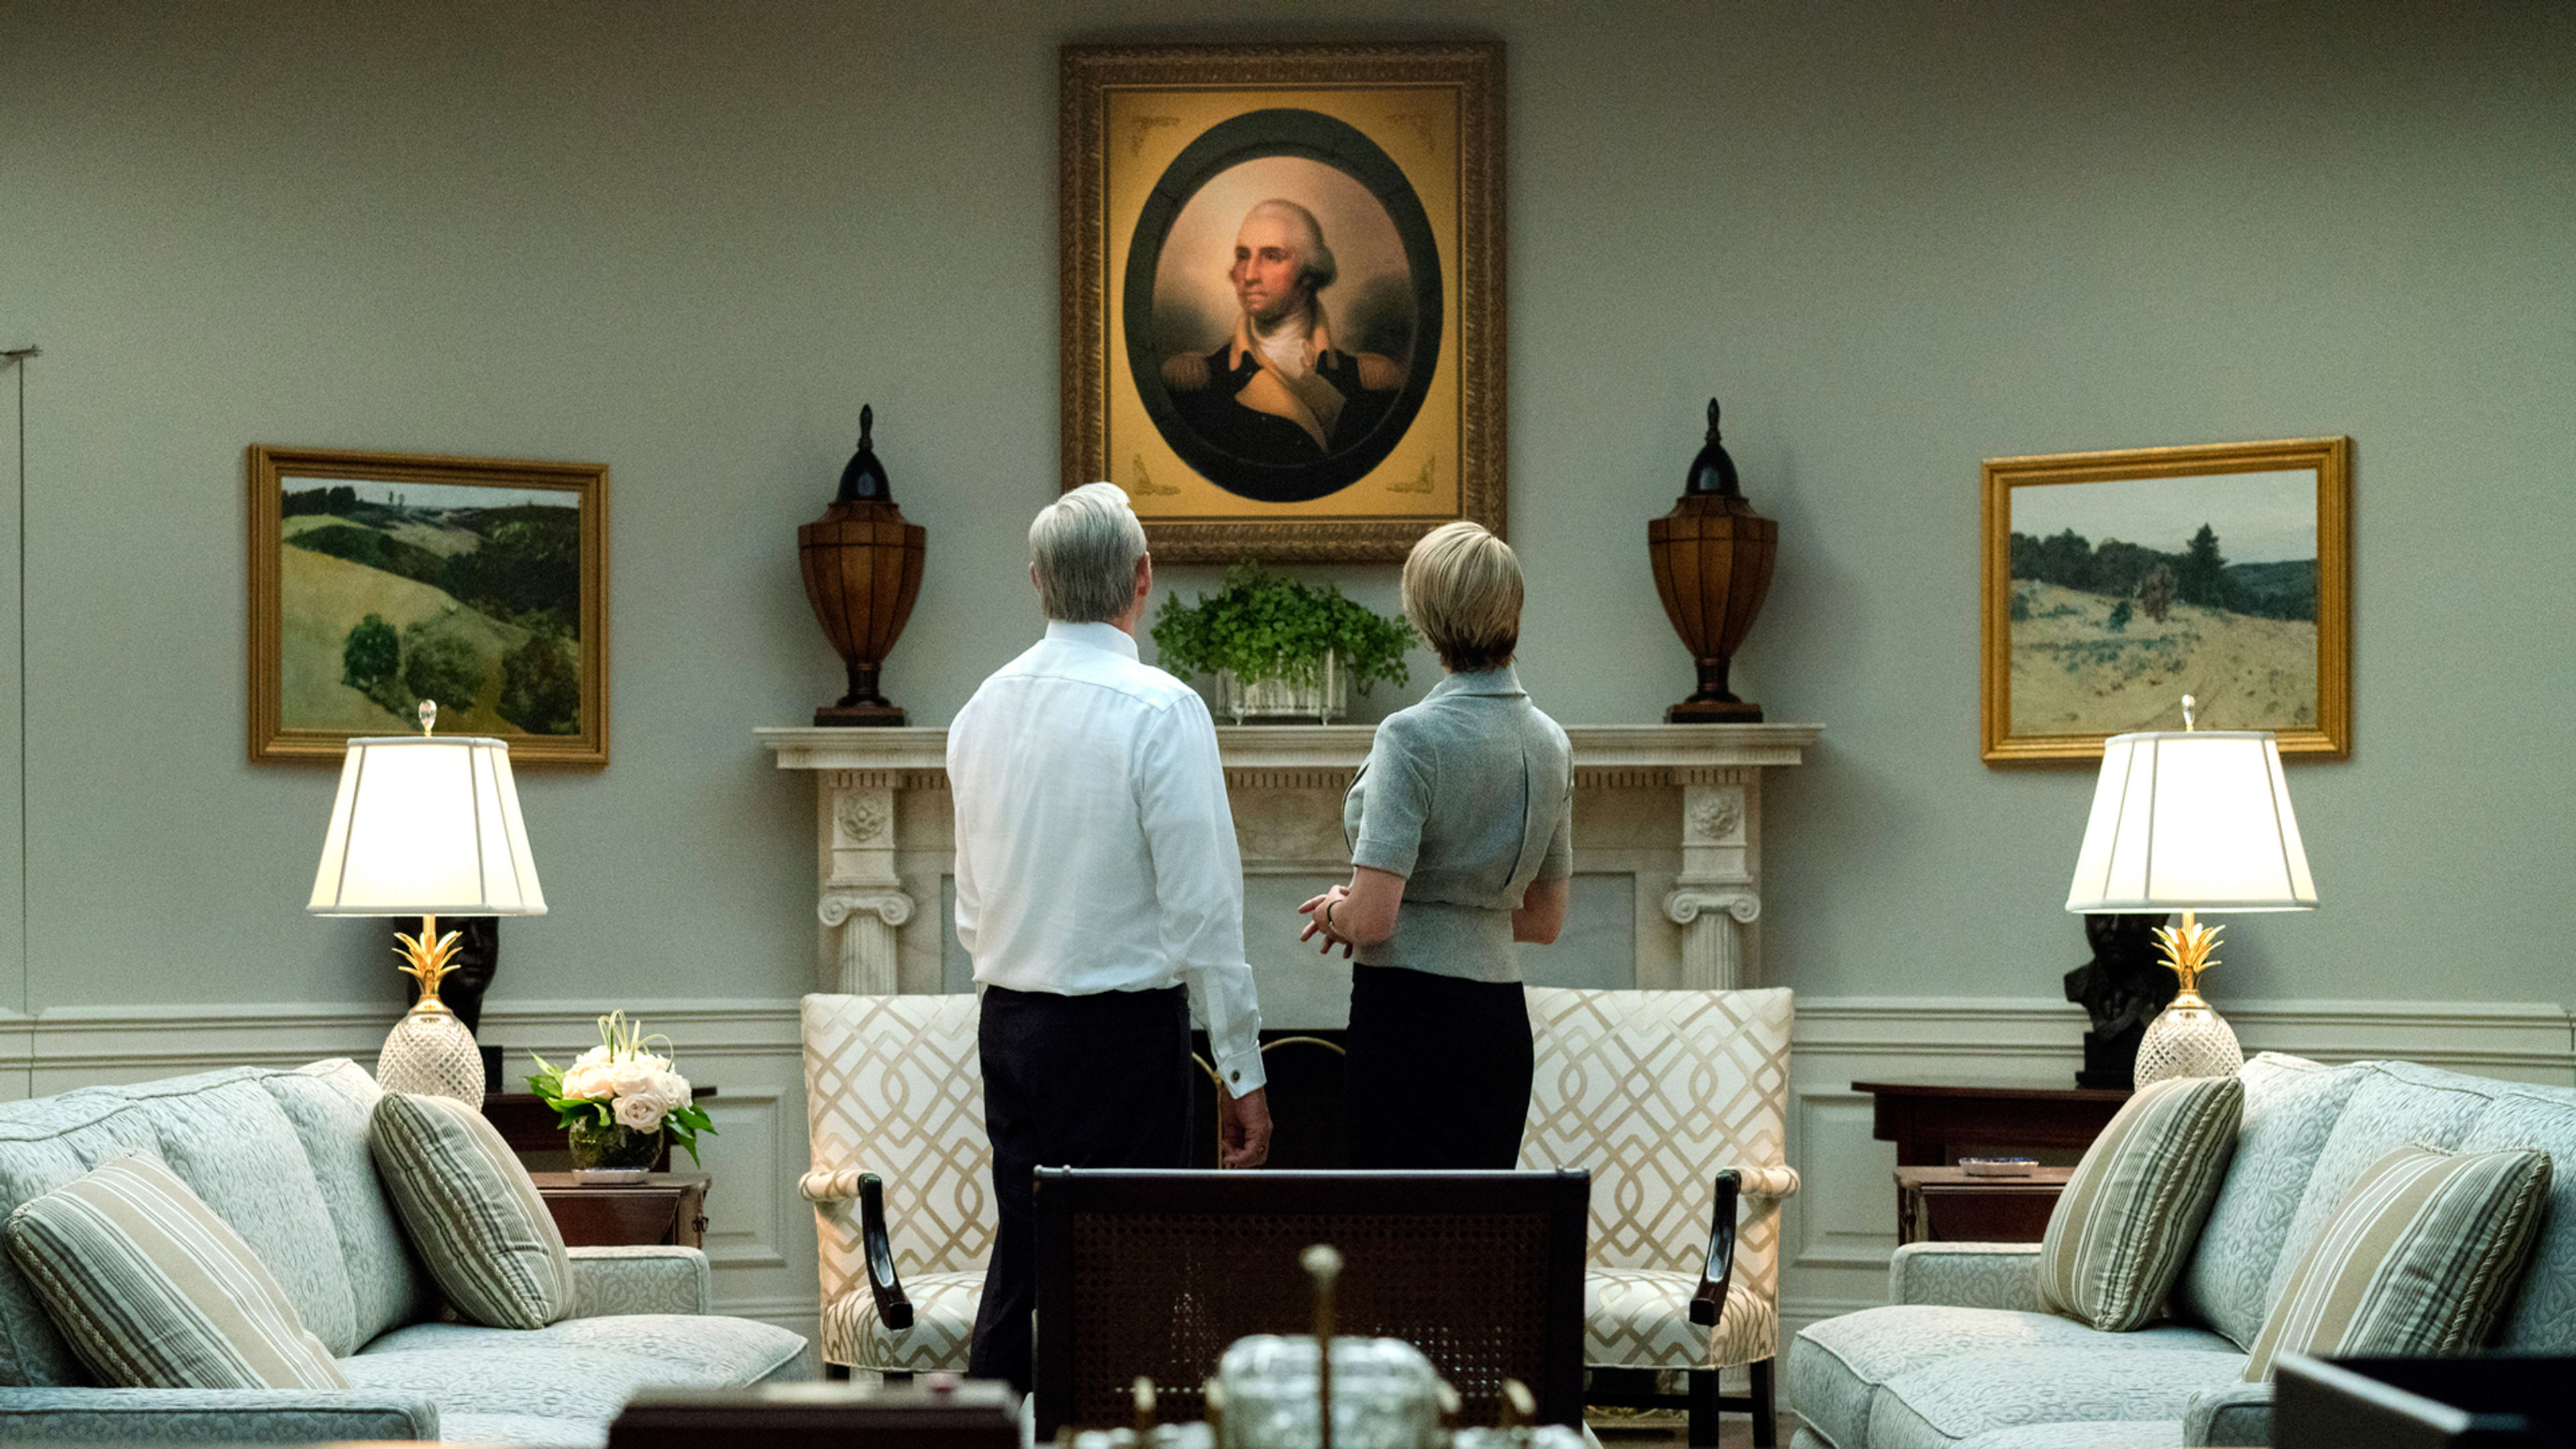 Netflix Is Making A “House of Cards” Spinoff. Here’s What It Should Be